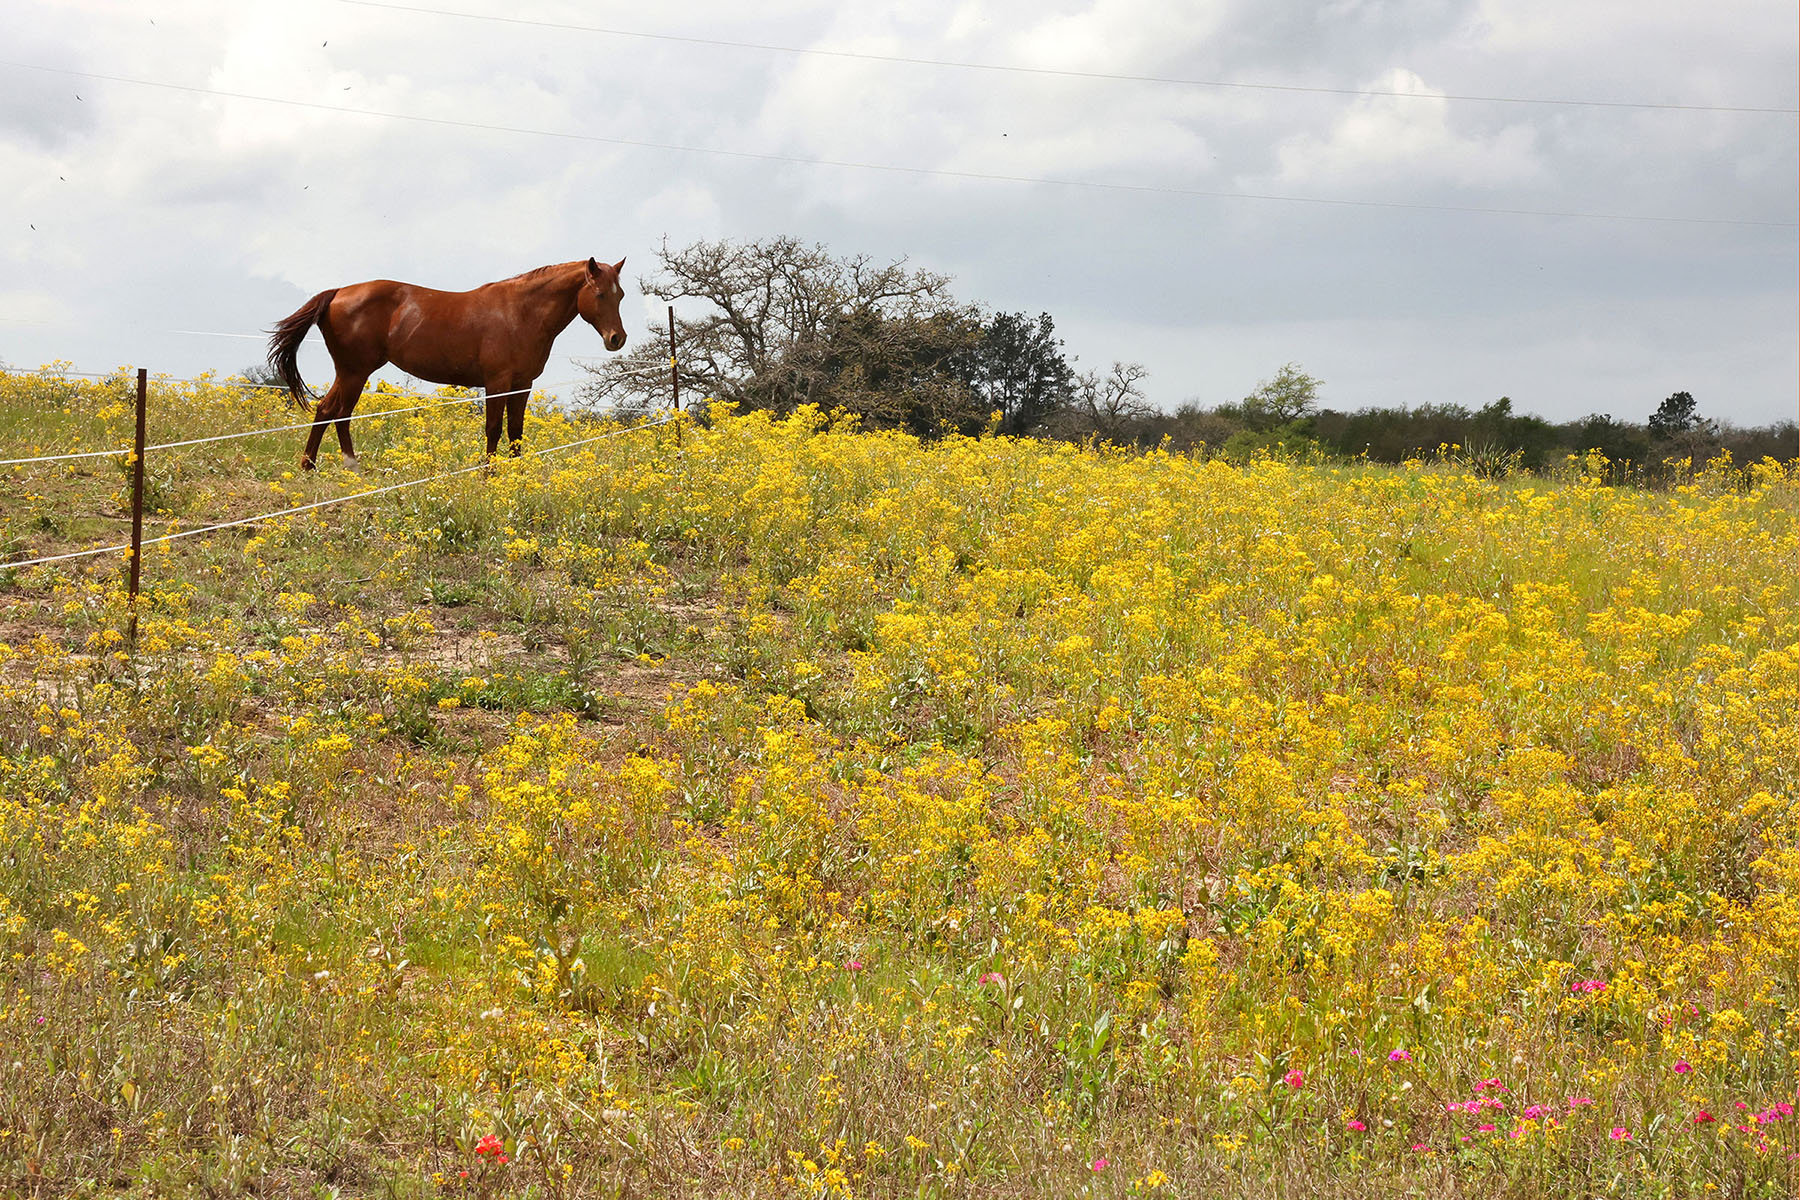 A horse looks out over a large field of flowers under gray sky